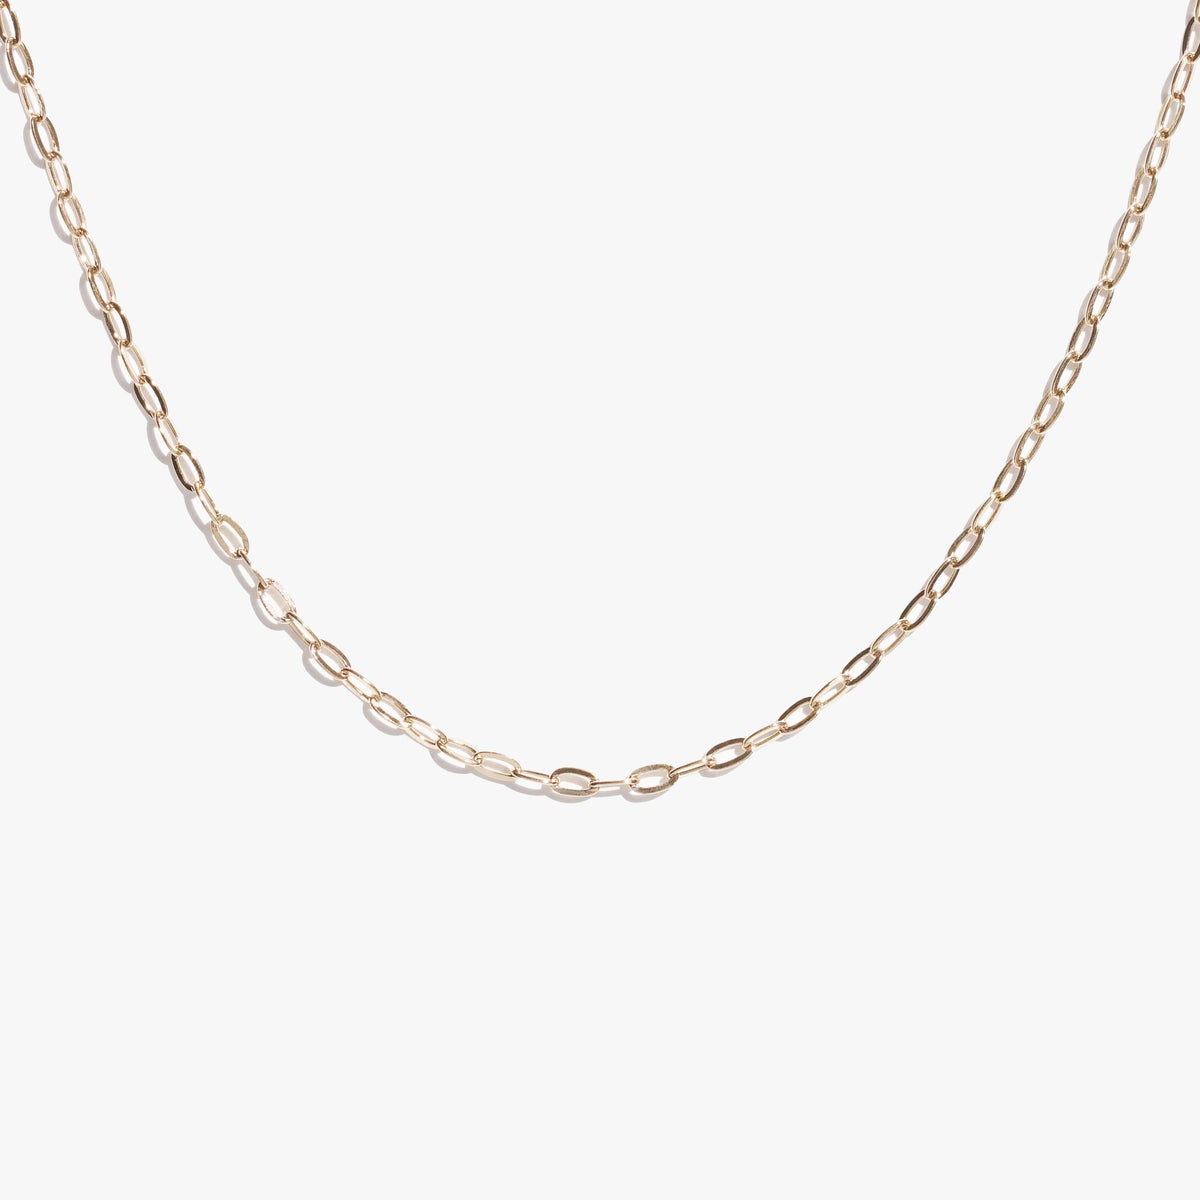 Oval Link Chain Gold / 16